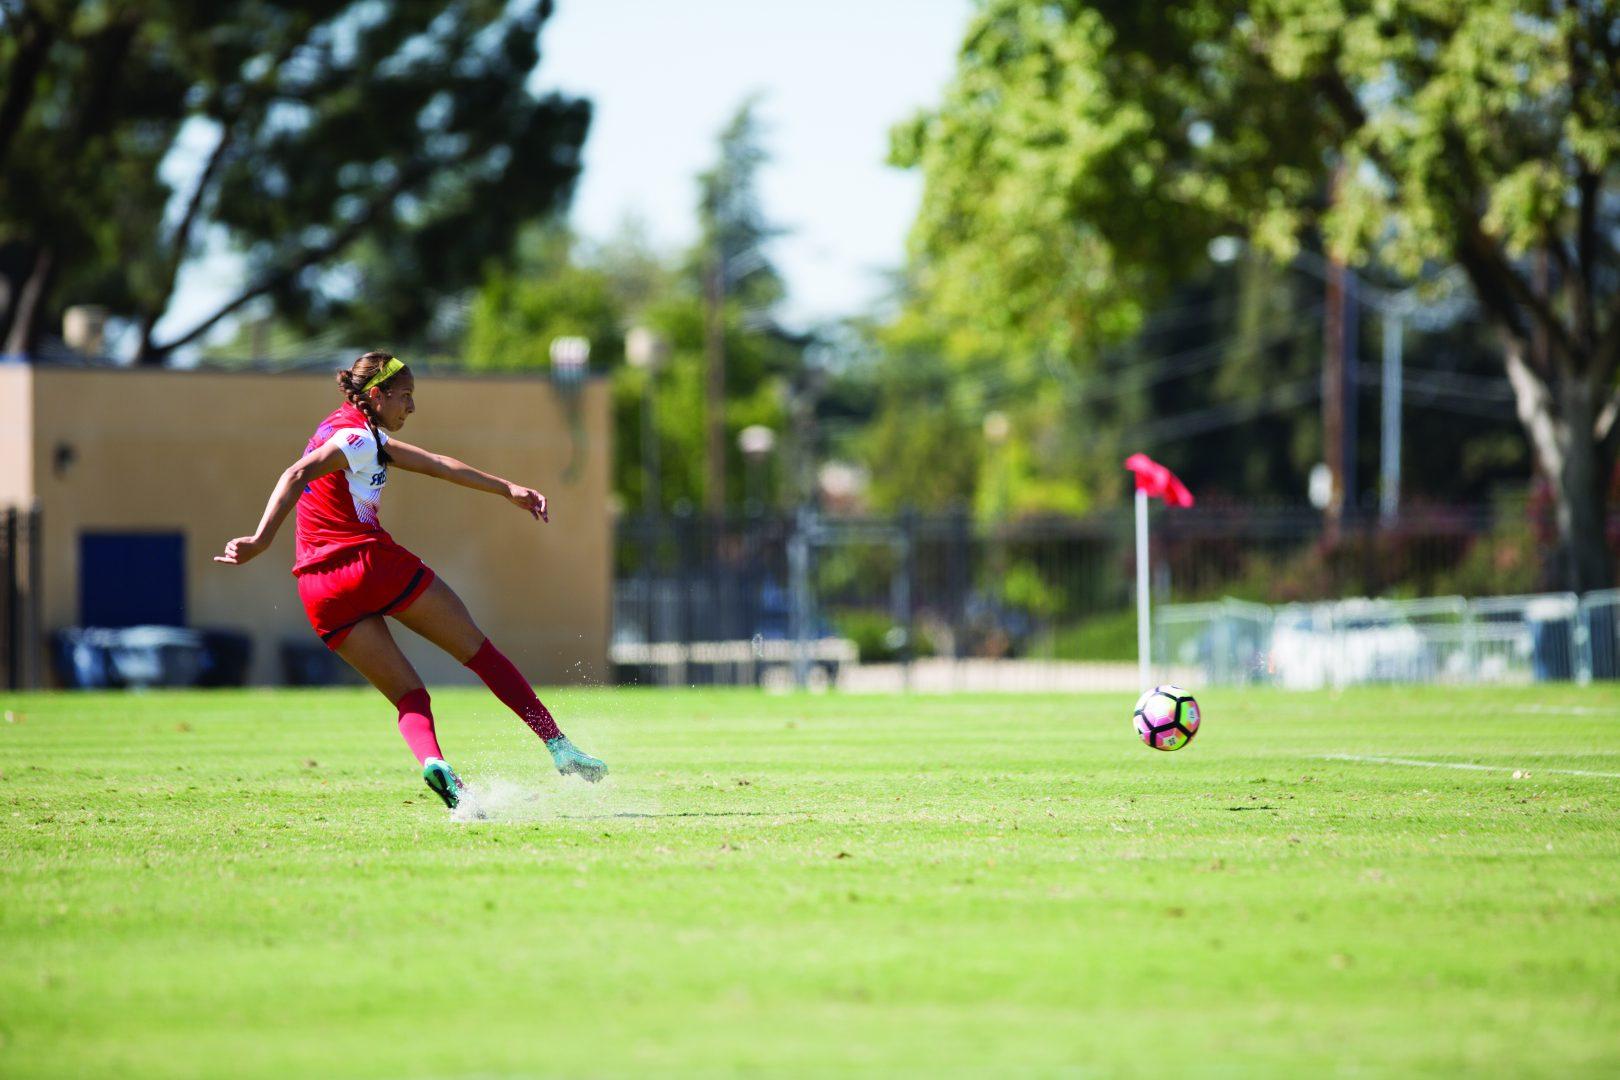 Myra Delgadillo scores a goal off a penalty kick during a home game against New Mexico on Sunday afternoon. (Christian Ortuno/The Collegian)